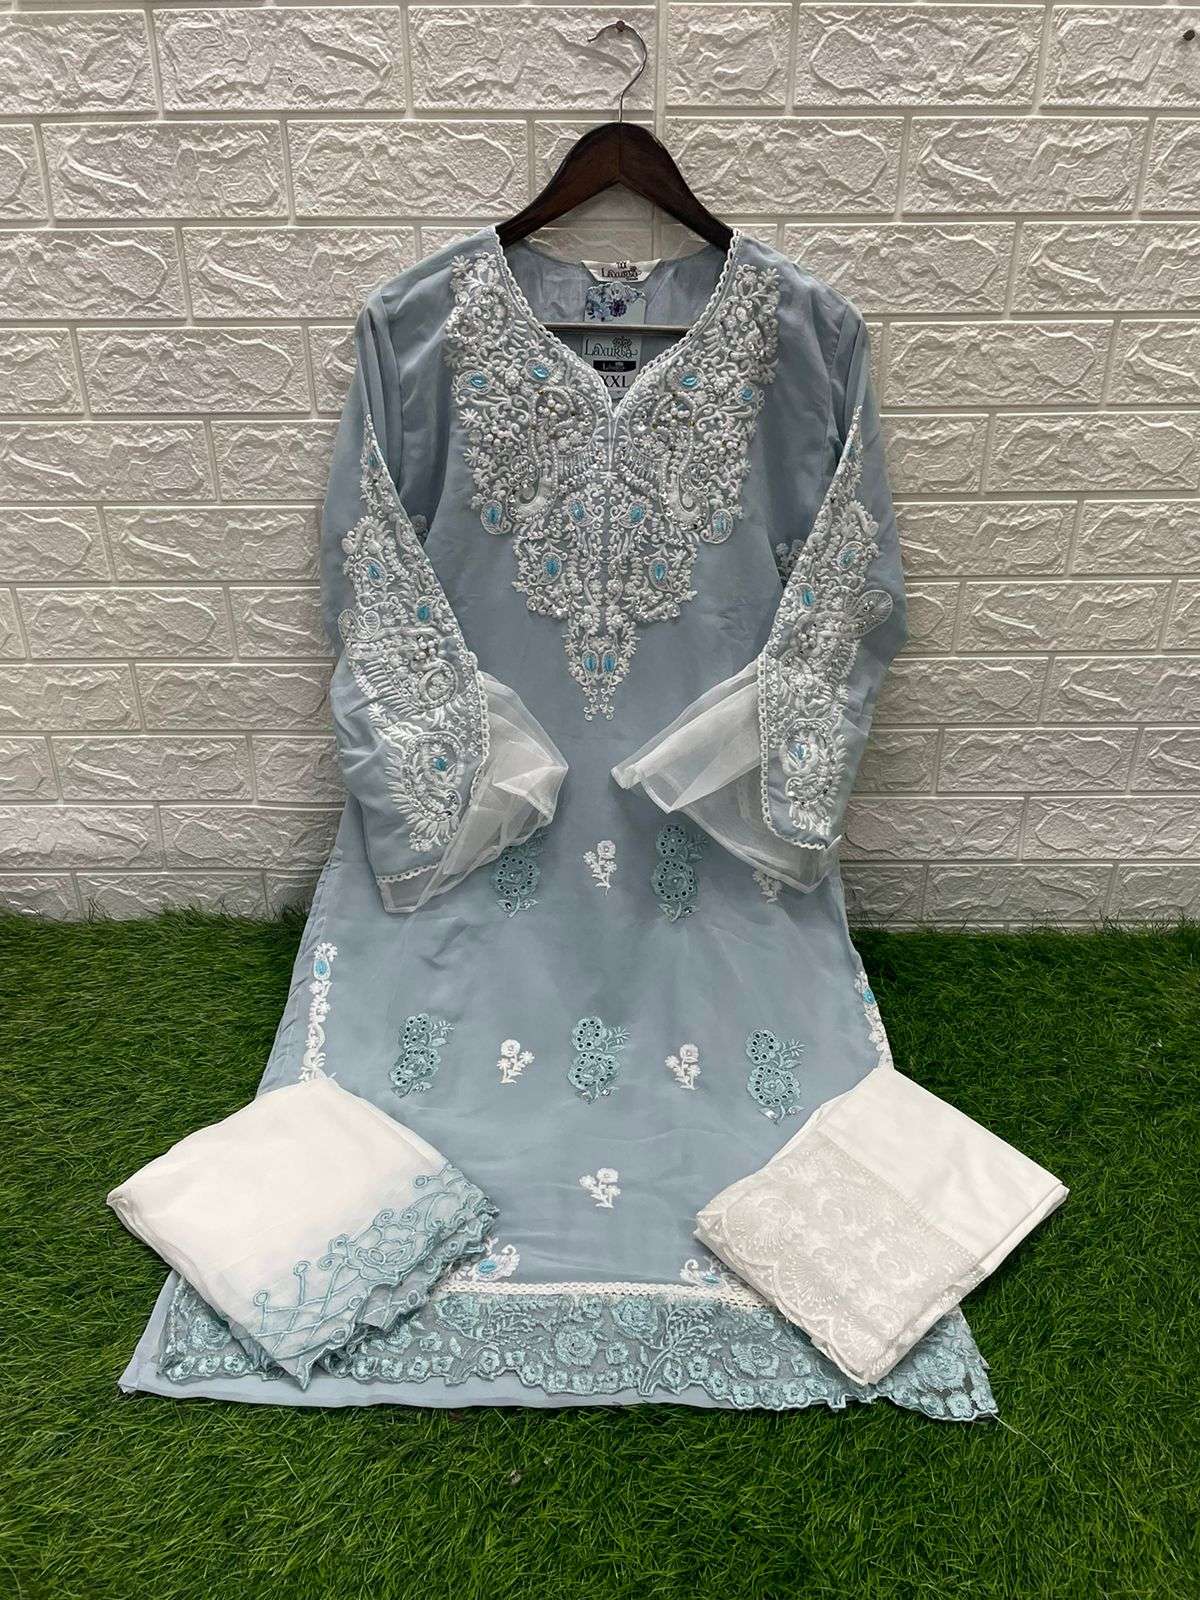 Luxuria Trendz Hit Design 1283 By Luxuria Designer Pakistani Suits Beautiful Stylish Fancy Colorful Party Wear & Occasional Wear Faux Georgette Embroidered Dresses At Wholesale Price